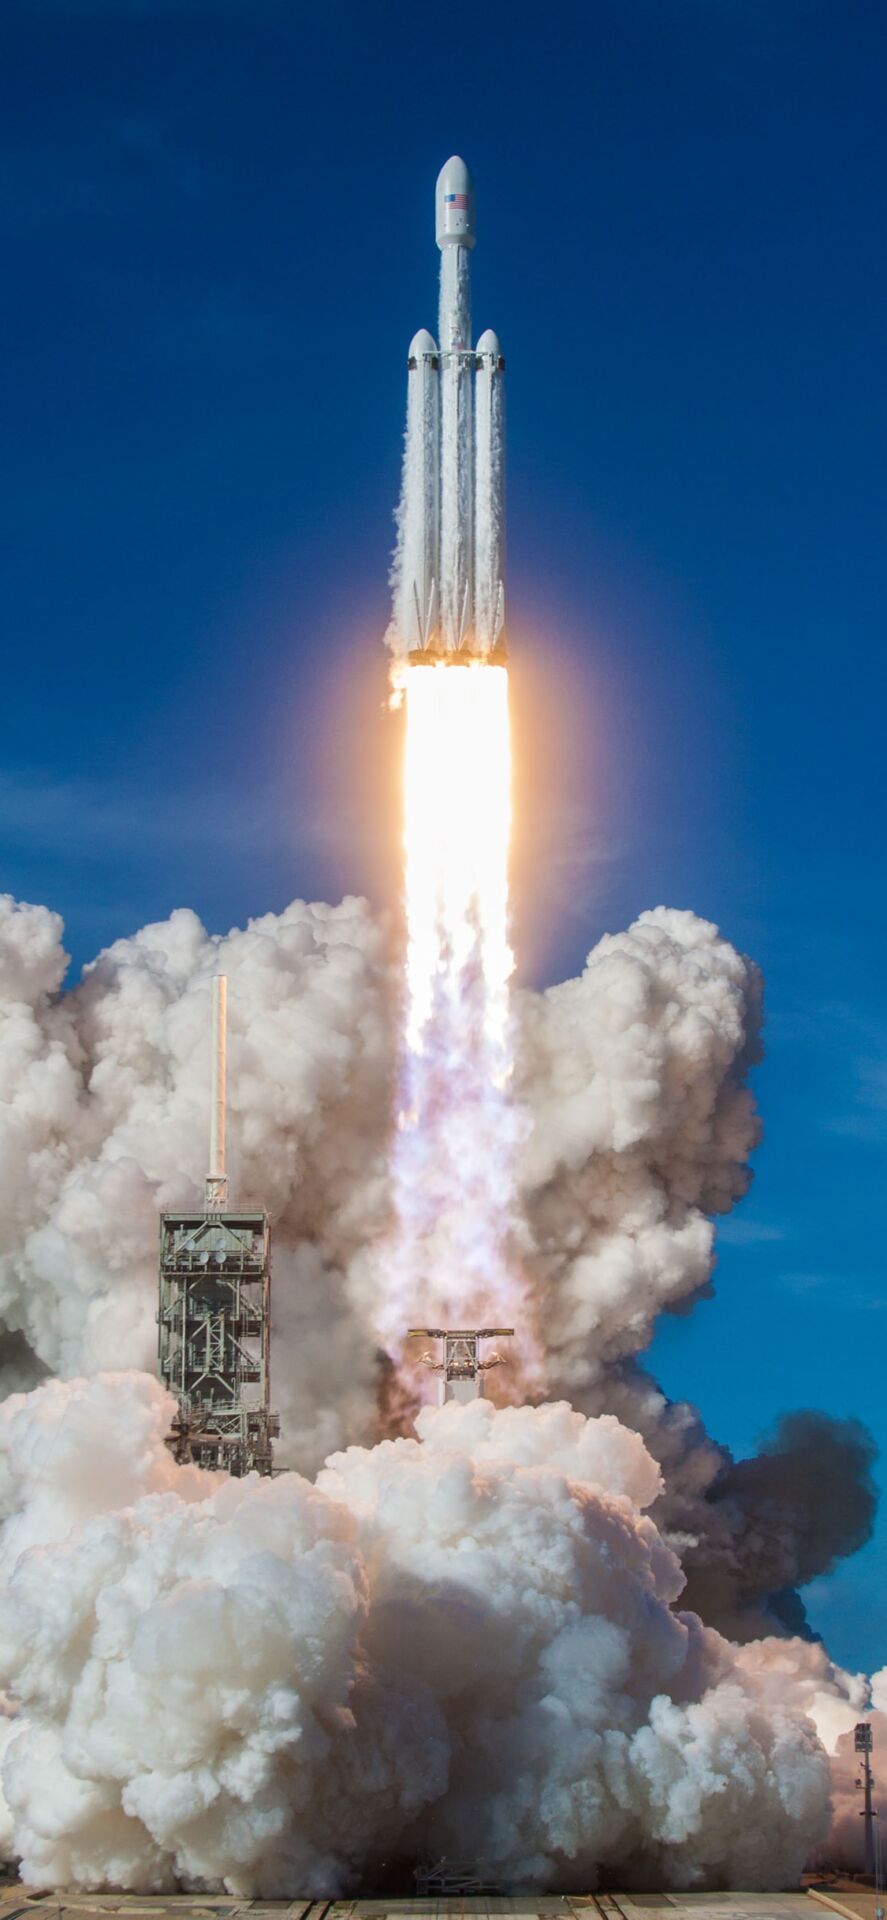 10 Amazing SpaceX Wallpapers para iPhone X (Ep. 12)